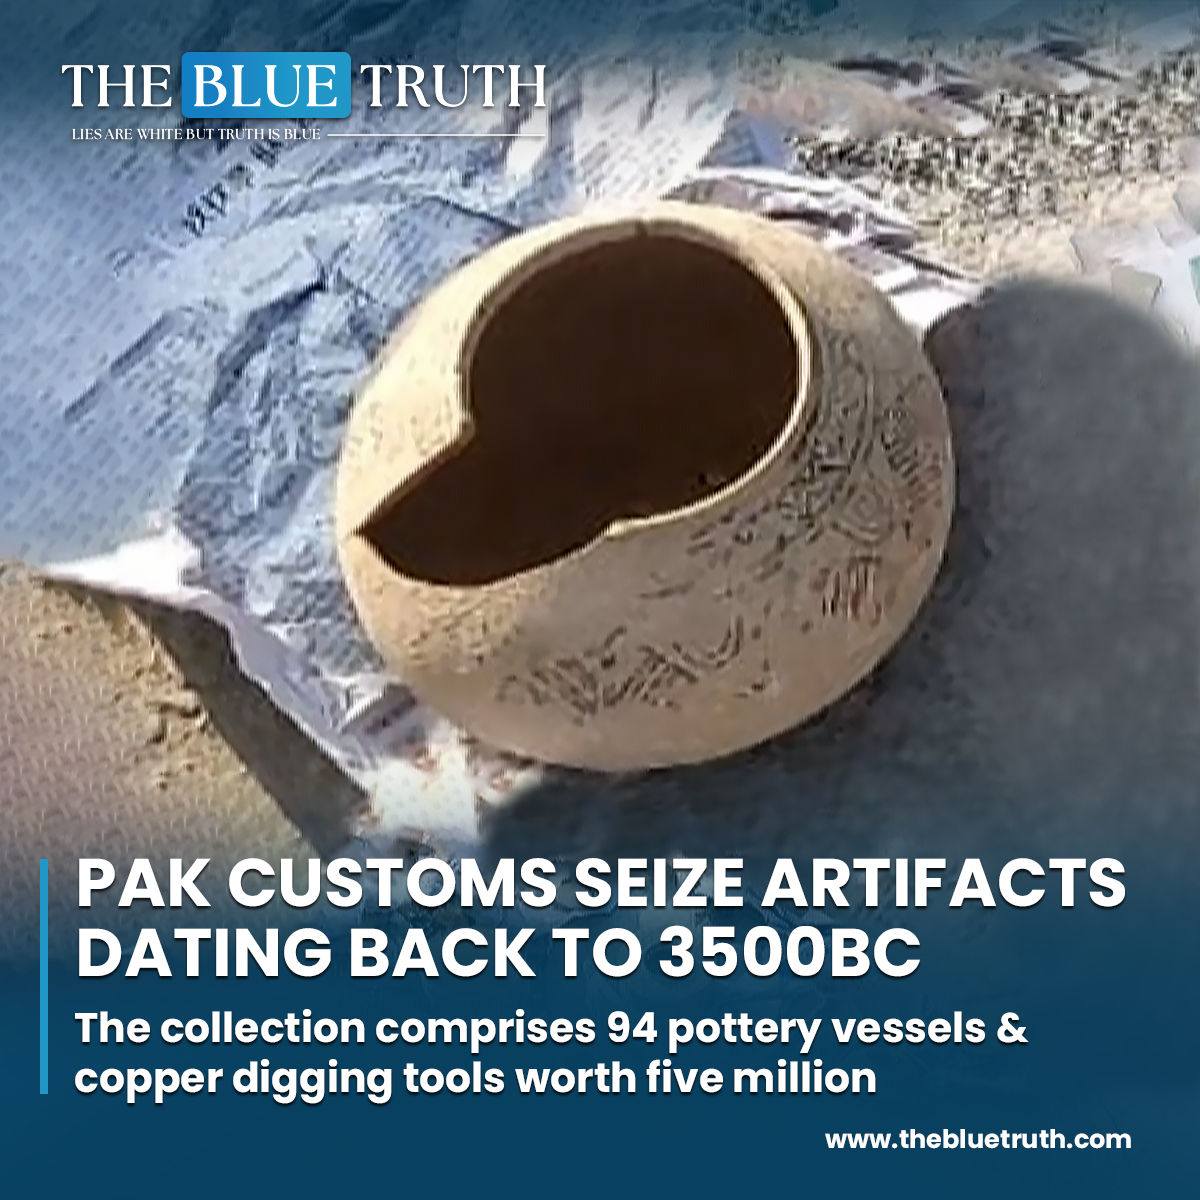 Pak Customs seize artifacts dating back to 3500BC.
The collection comprises 94 pottery vessels & copper digging tools worth five million.

#CustomsInterception #ArtefactSmuggling #BronzeAge #CulturalHeritage #CustomsEnforcement #ArcheologicalTreasures #tbt #TheBlueTruth